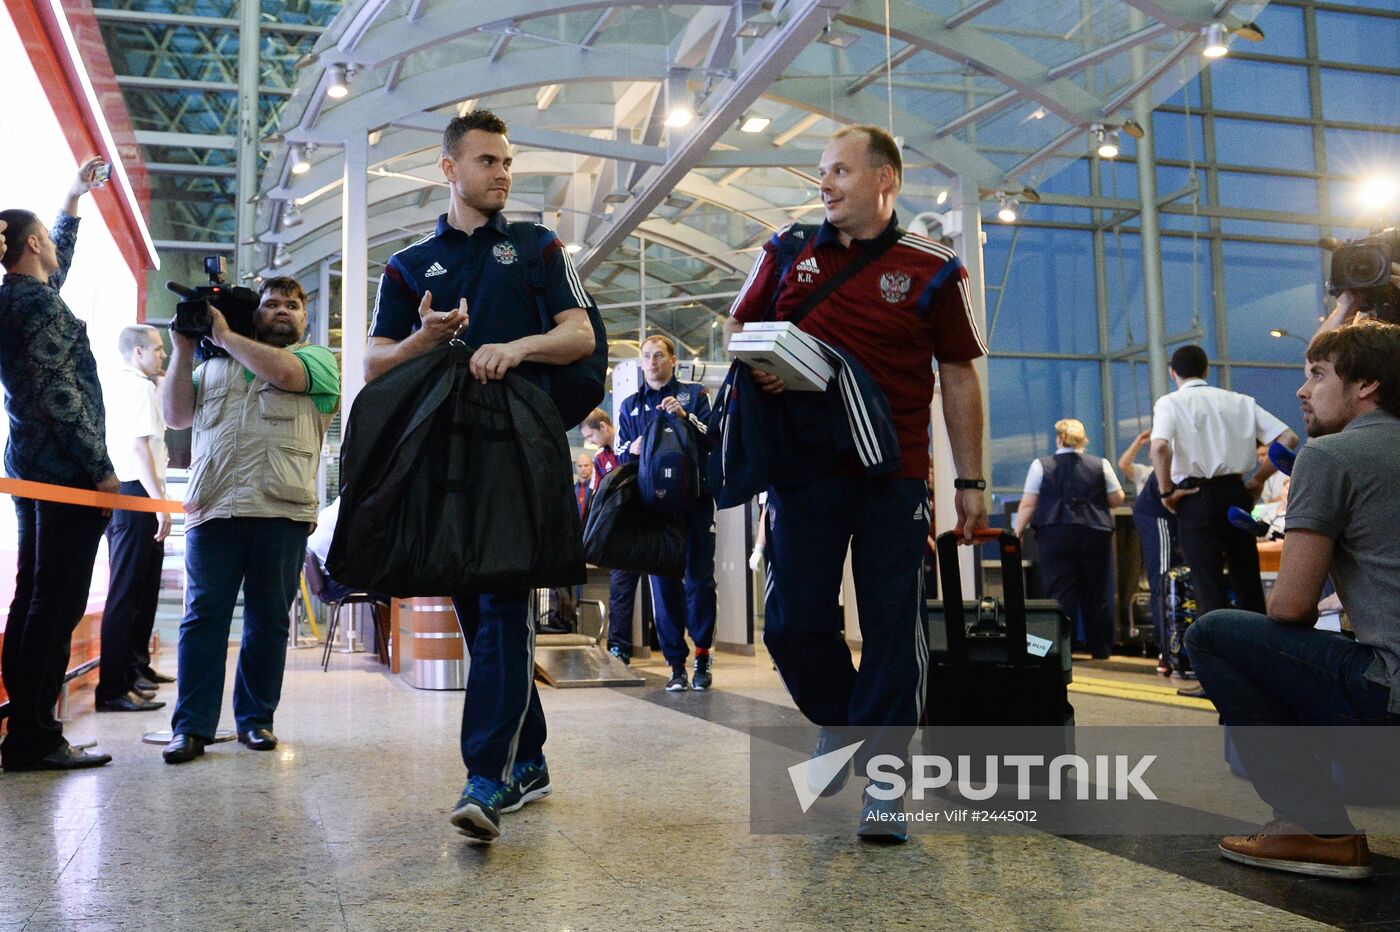 Russian national football team departs for World Cup in Brazil